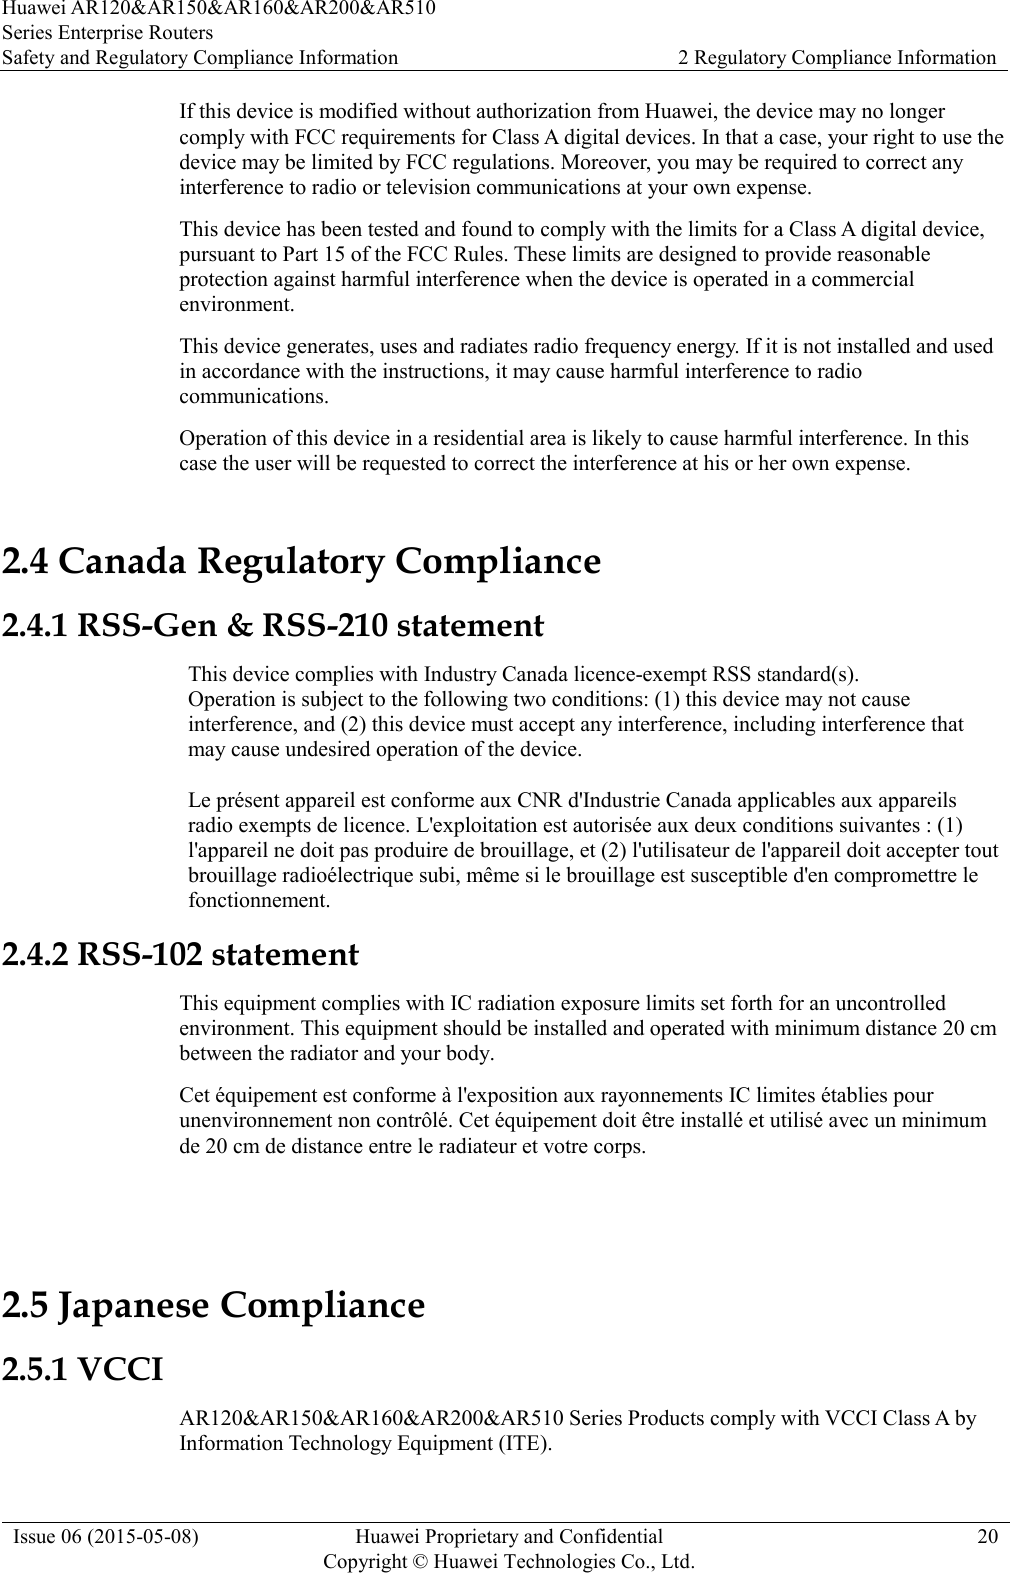 Huawei AR120&amp;AR150&amp;AR160&amp;AR200&amp;AR510 Series Enterprise Routers Safety and Regulatory Compliance Information 2 Regulatory Compliance Information  Issue 06 (2015-05-08) Huawei Proprietary and Confidential           Copyright © Huawei Technologies Co., Ltd. 20  If this device is modified without authorization from Huawei, the device may no longer comply with FCC requirements for Class A digital devices. In that a case, your right to use the device may be limited by FCC regulations. Moreover, you may be required to correct any interference to radio or television communications at your own expense. This device has been tested and found to comply with the limits for a Class A digital device, pursuant to Part 15 of the FCC Rules. These limits are designed to provide reasonable protection against harmful interference when the device is operated in a commercial environment. This device generates, uses and radiates radio frequency energy. If it is not installed and used in accordance with the instructions, it may cause harmful interference to radio communications. Operation of this device in a residential area is likely to cause harmful interference. In this case the user will be requested to correct the interference at his or her own expense. 2.4 Canada Regulatory Compliance 2.4.1 RSS-Gen &amp; RSS-210 statement This device complies with Industry Canada licence-exempt RSS standard(s). Operation is subject to the following two conditions: (1) this device may not cause interference, and (2) this device must accept any interference, including interference that may cause undesired operation of the device.  Le présent appareil est conforme aux CNR d&apos;Industrie Canada applicables aux appareils radio exempts de licence. L&apos;exploitation est autorisée aux deux conditions suivantes : (1) l&apos;appareil ne doit pas produire de brouillage, et (2) l&apos;utilisateur de l&apos;appareil doit accepter tout brouillage radioélectrique subi, même si le brouillage est susceptible d&apos;en compromettre le fonctionnement. 2.4.2 RSS-102 statement This equipment complies with IC radiation exposure limits set forth for an uncontrolled environment. This equipment should be installed and operated with minimum distance 20 cm between the radiator and your body. Cet équipement est conforme à l&apos;exposition aux rayonnements IC limites établies pour unenvironnement non contrôlé. Cet équipement doit être installé et utilisé avec un minimum de 20 cm de distance entre le radiateur et votre corps.  2.5 Japanese Compliance 2.5.1 VCCI AR120&amp;AR150&amp;AR160&amp;AR200&amp;AR510 Series Products comply with VCCI Class A by Information Technology Equipment (ITE).   